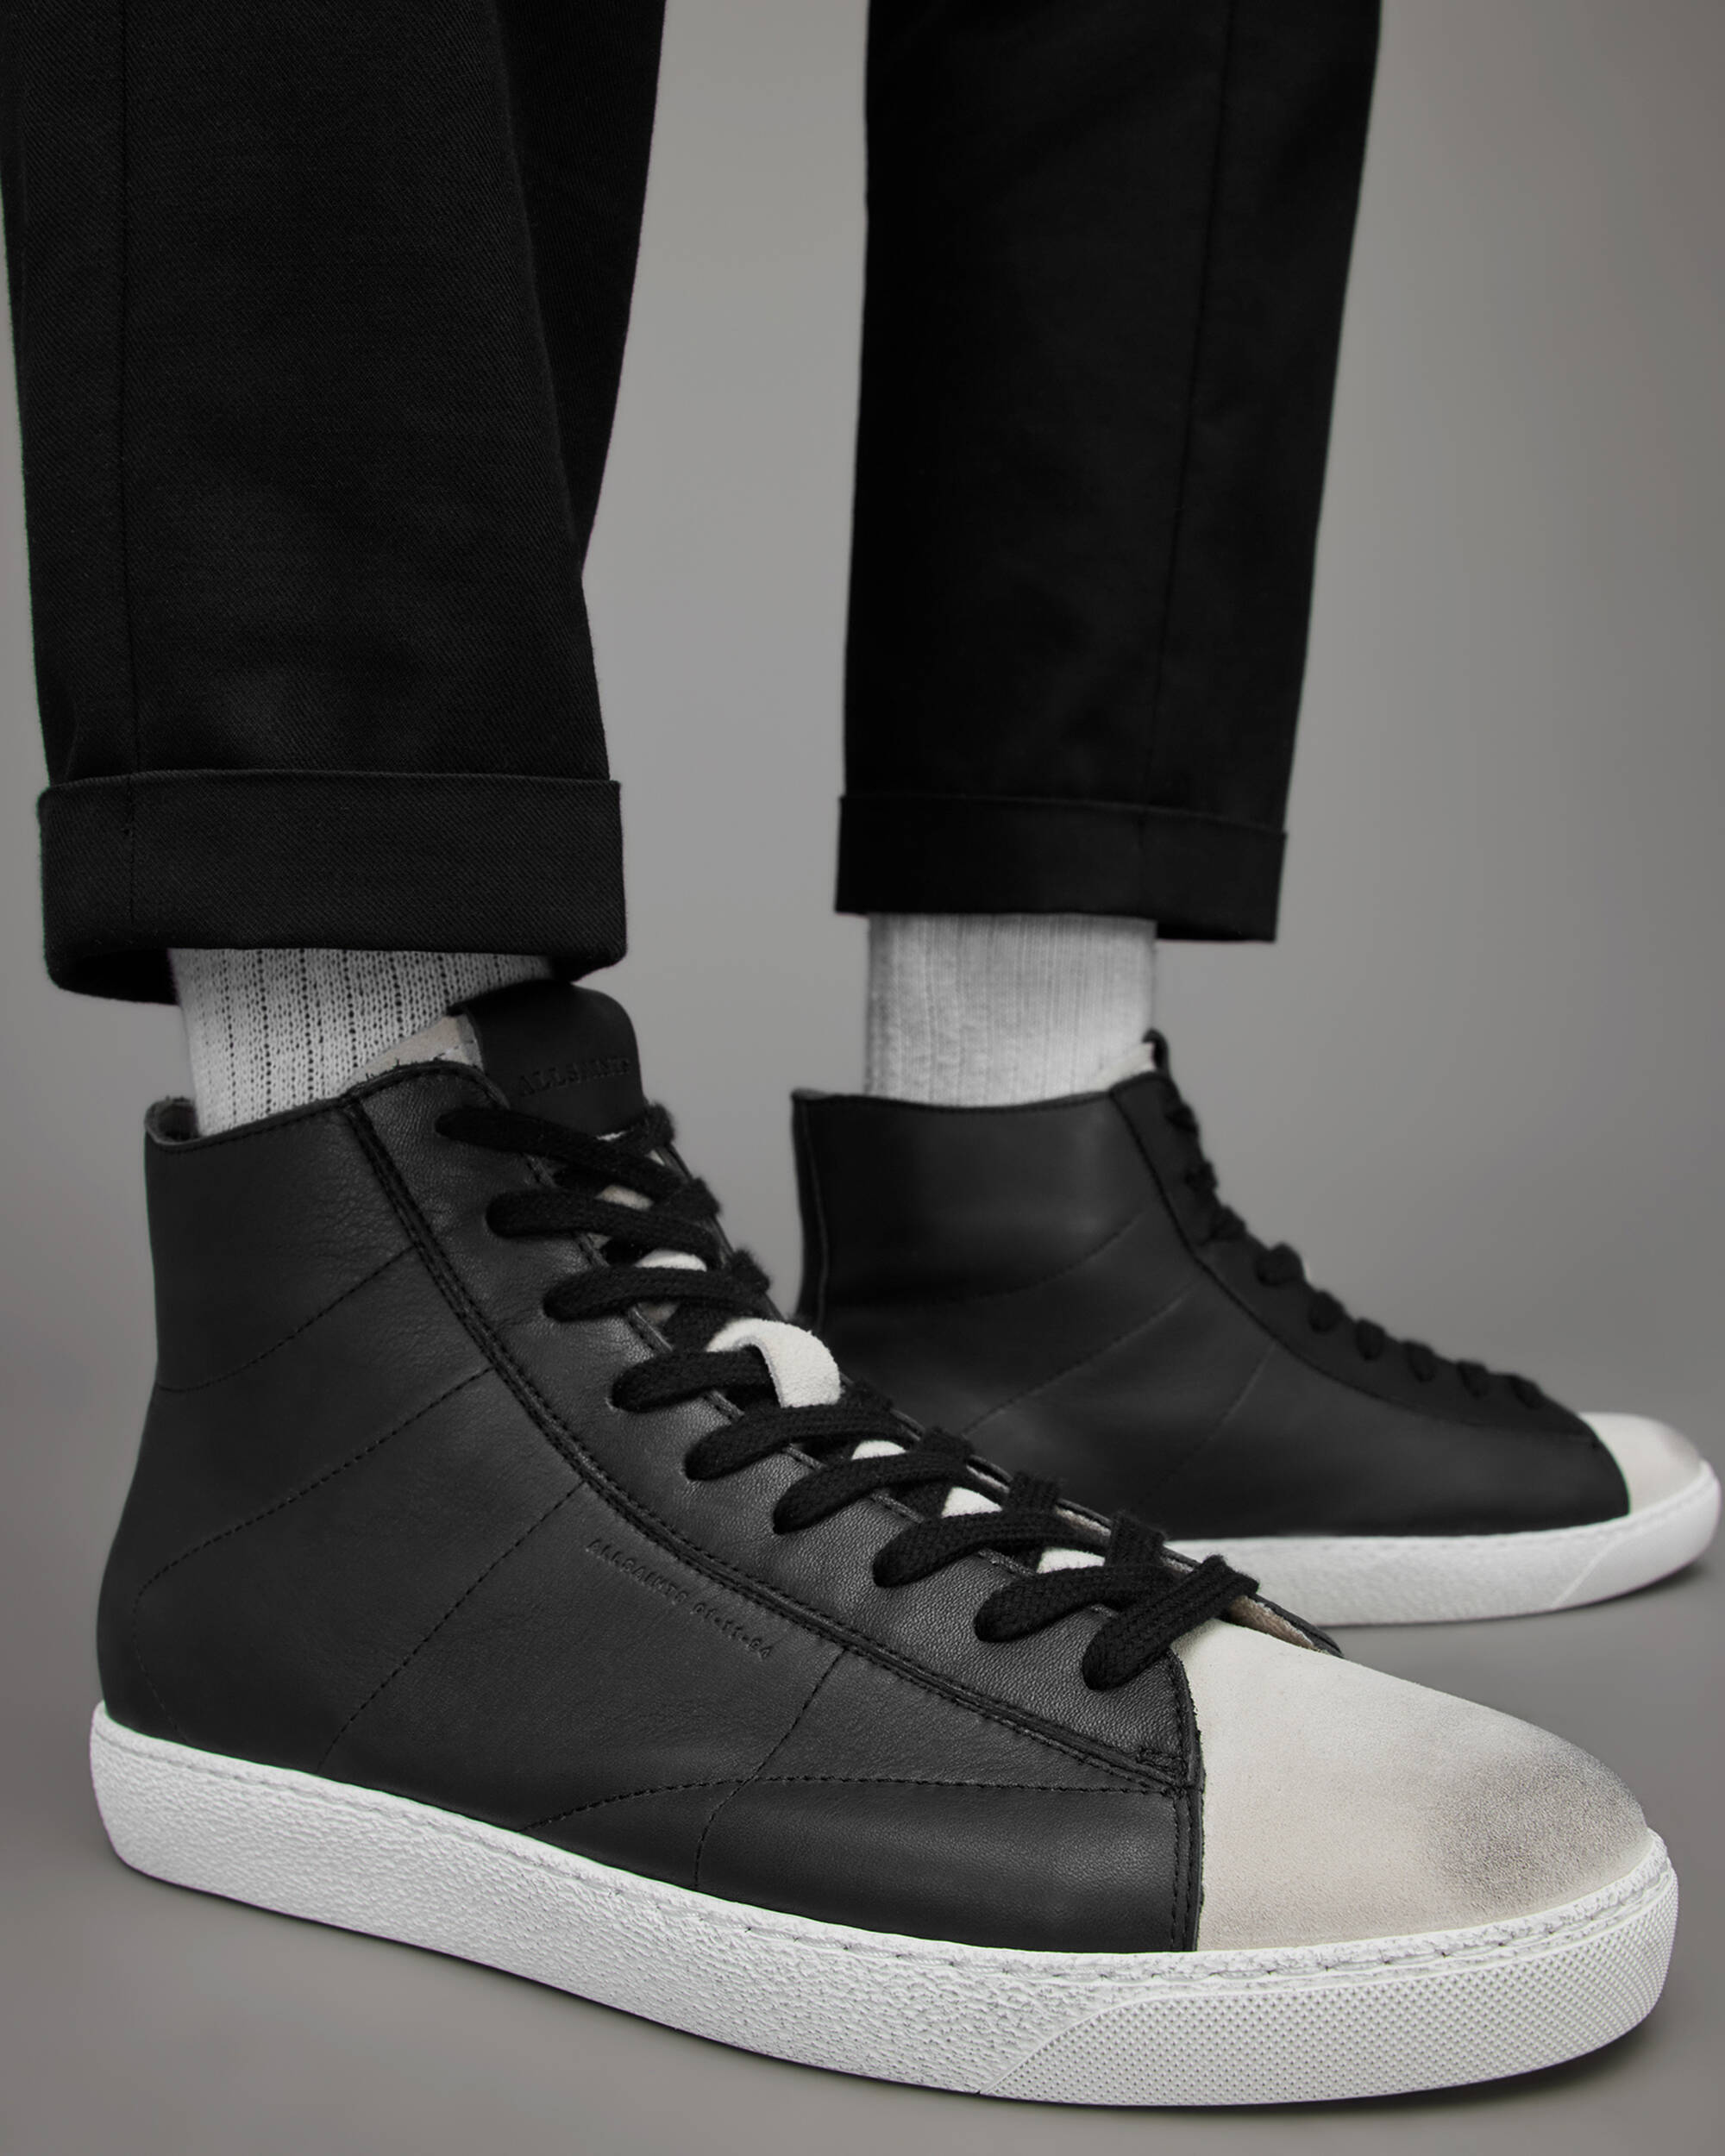 Tundy High Top Sneakers Black/White | ALLSAINTS US